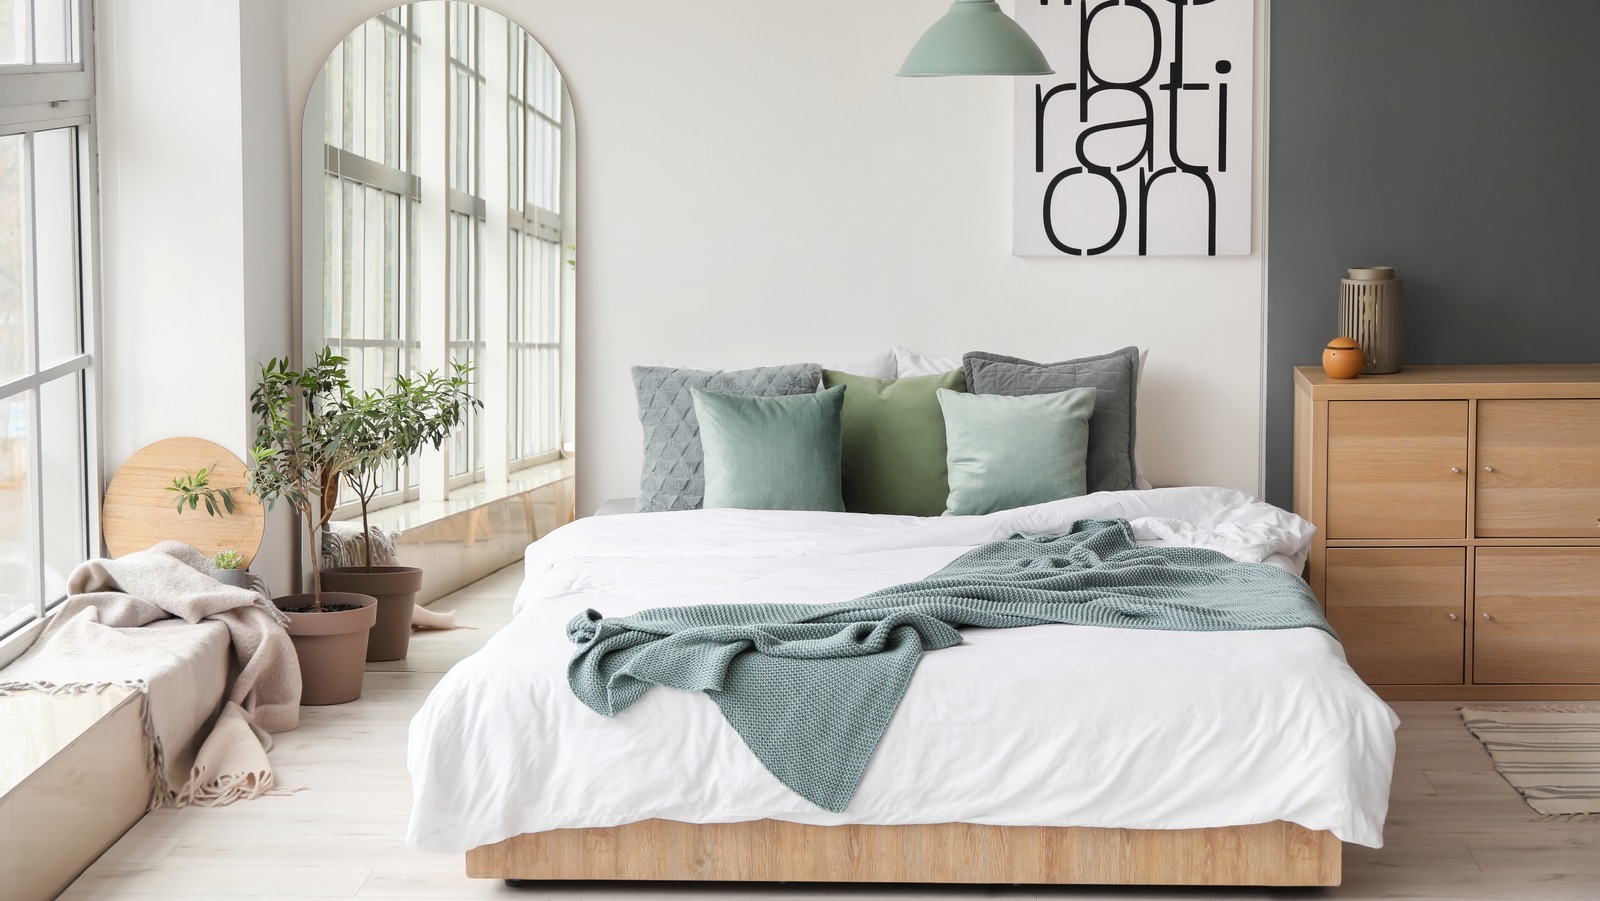 15 Bedroom Decorating Trends That Are Here To Stay